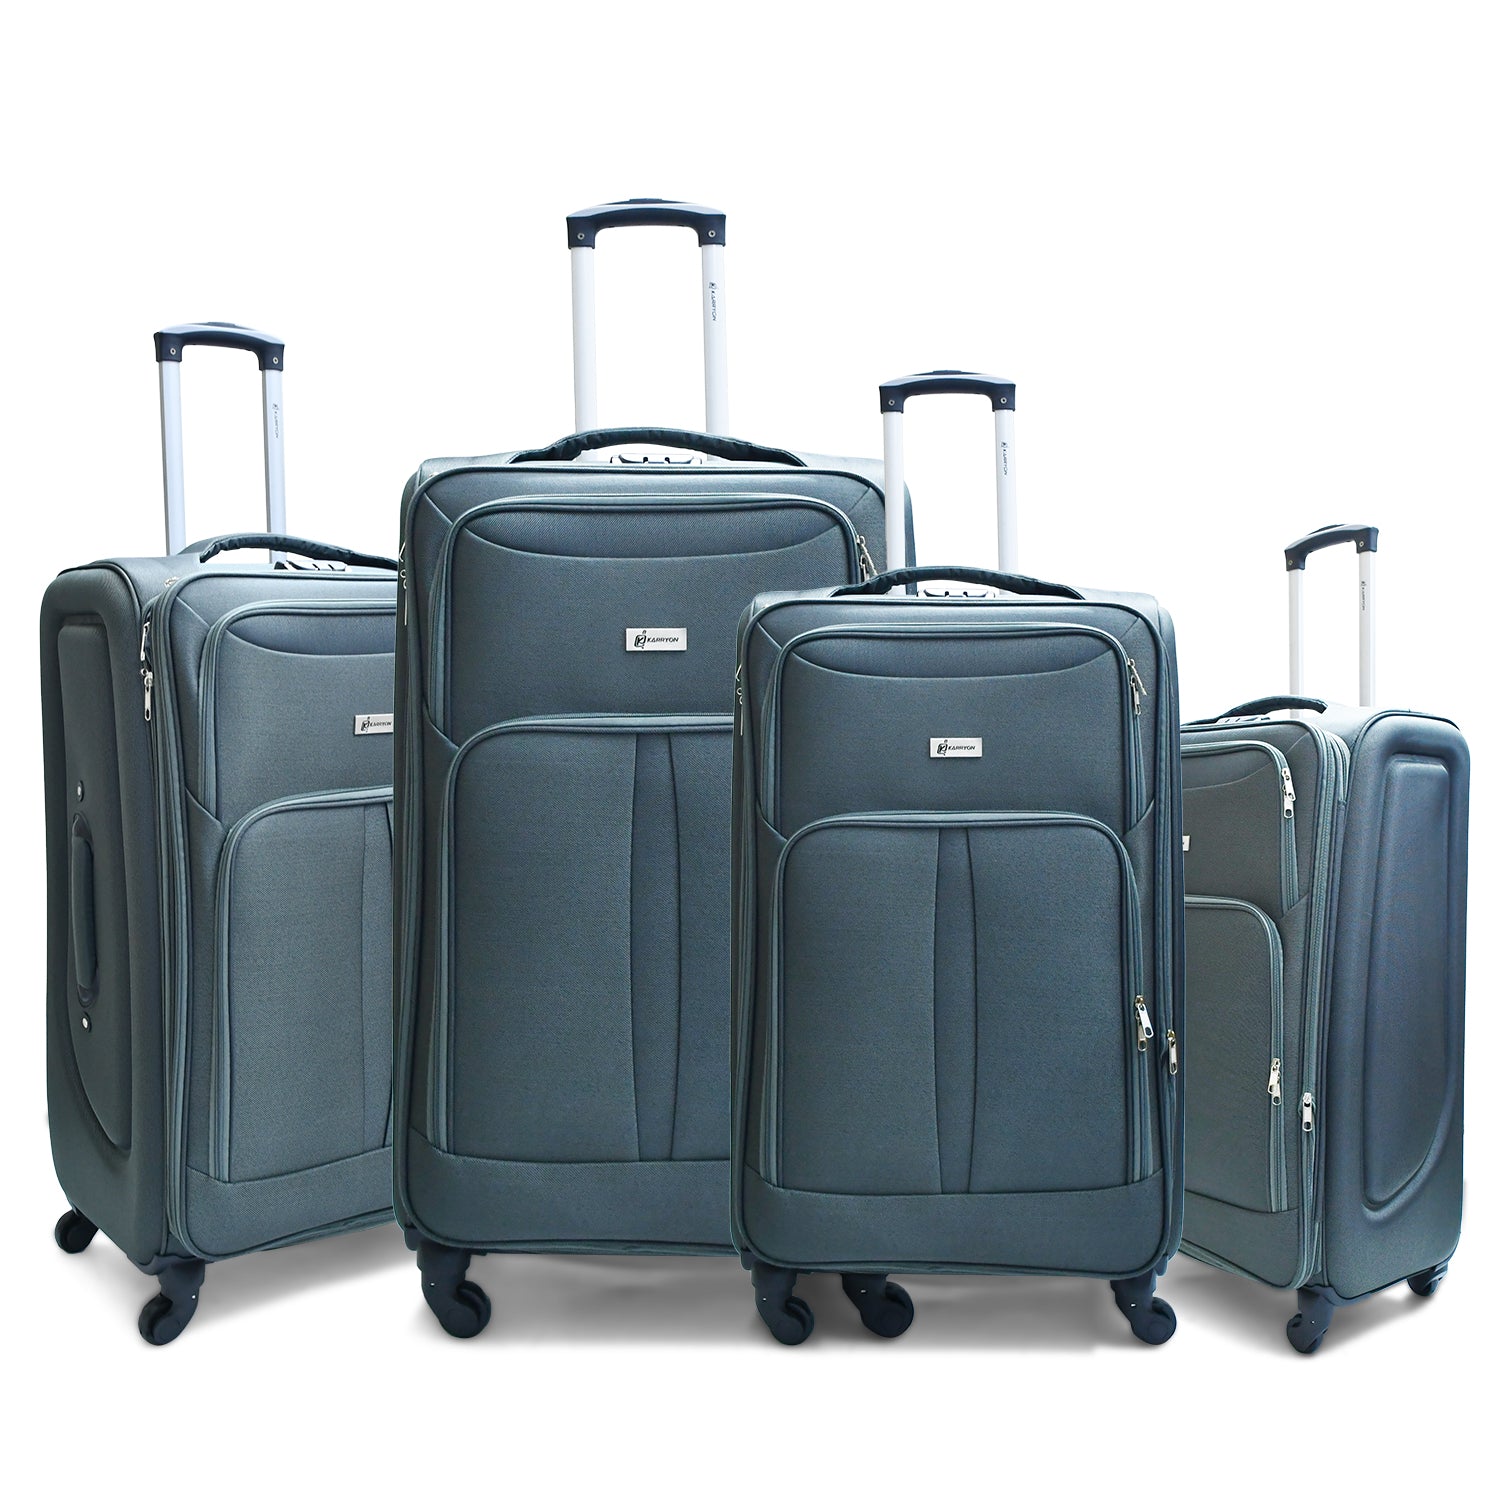 KARRY-ON GRAND SOFT LUGGAGE w/ PVC COVER 4PC LUGGAGE SET (20/24/28/32")